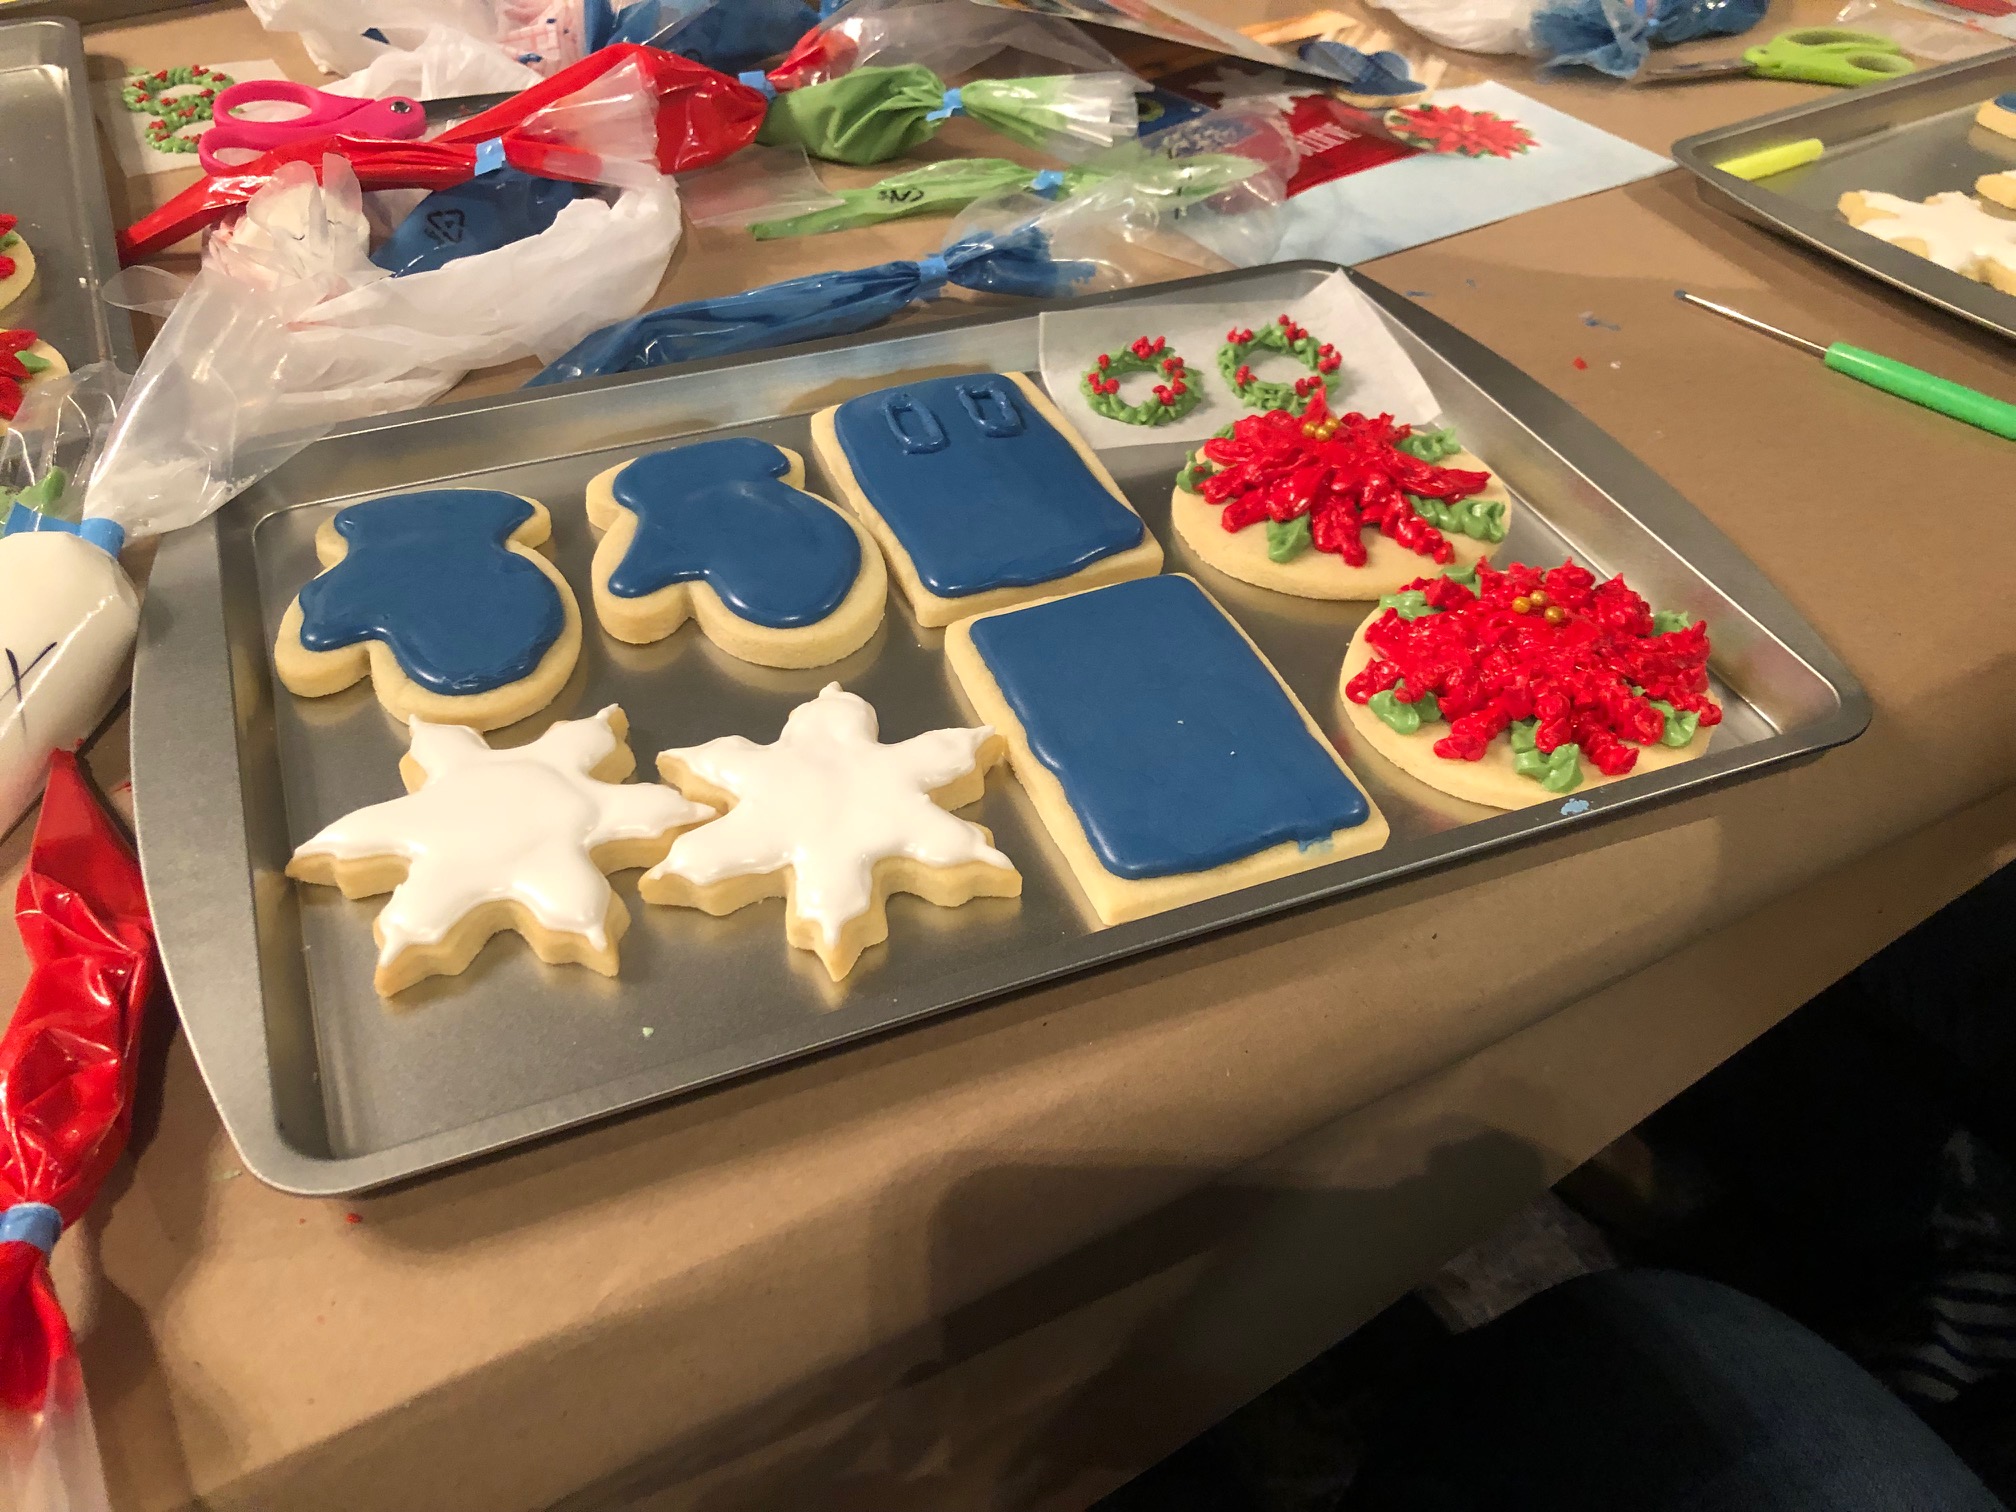 The author's tray of cookies in the process of being decorated. Photo by Alyssa Buckley.